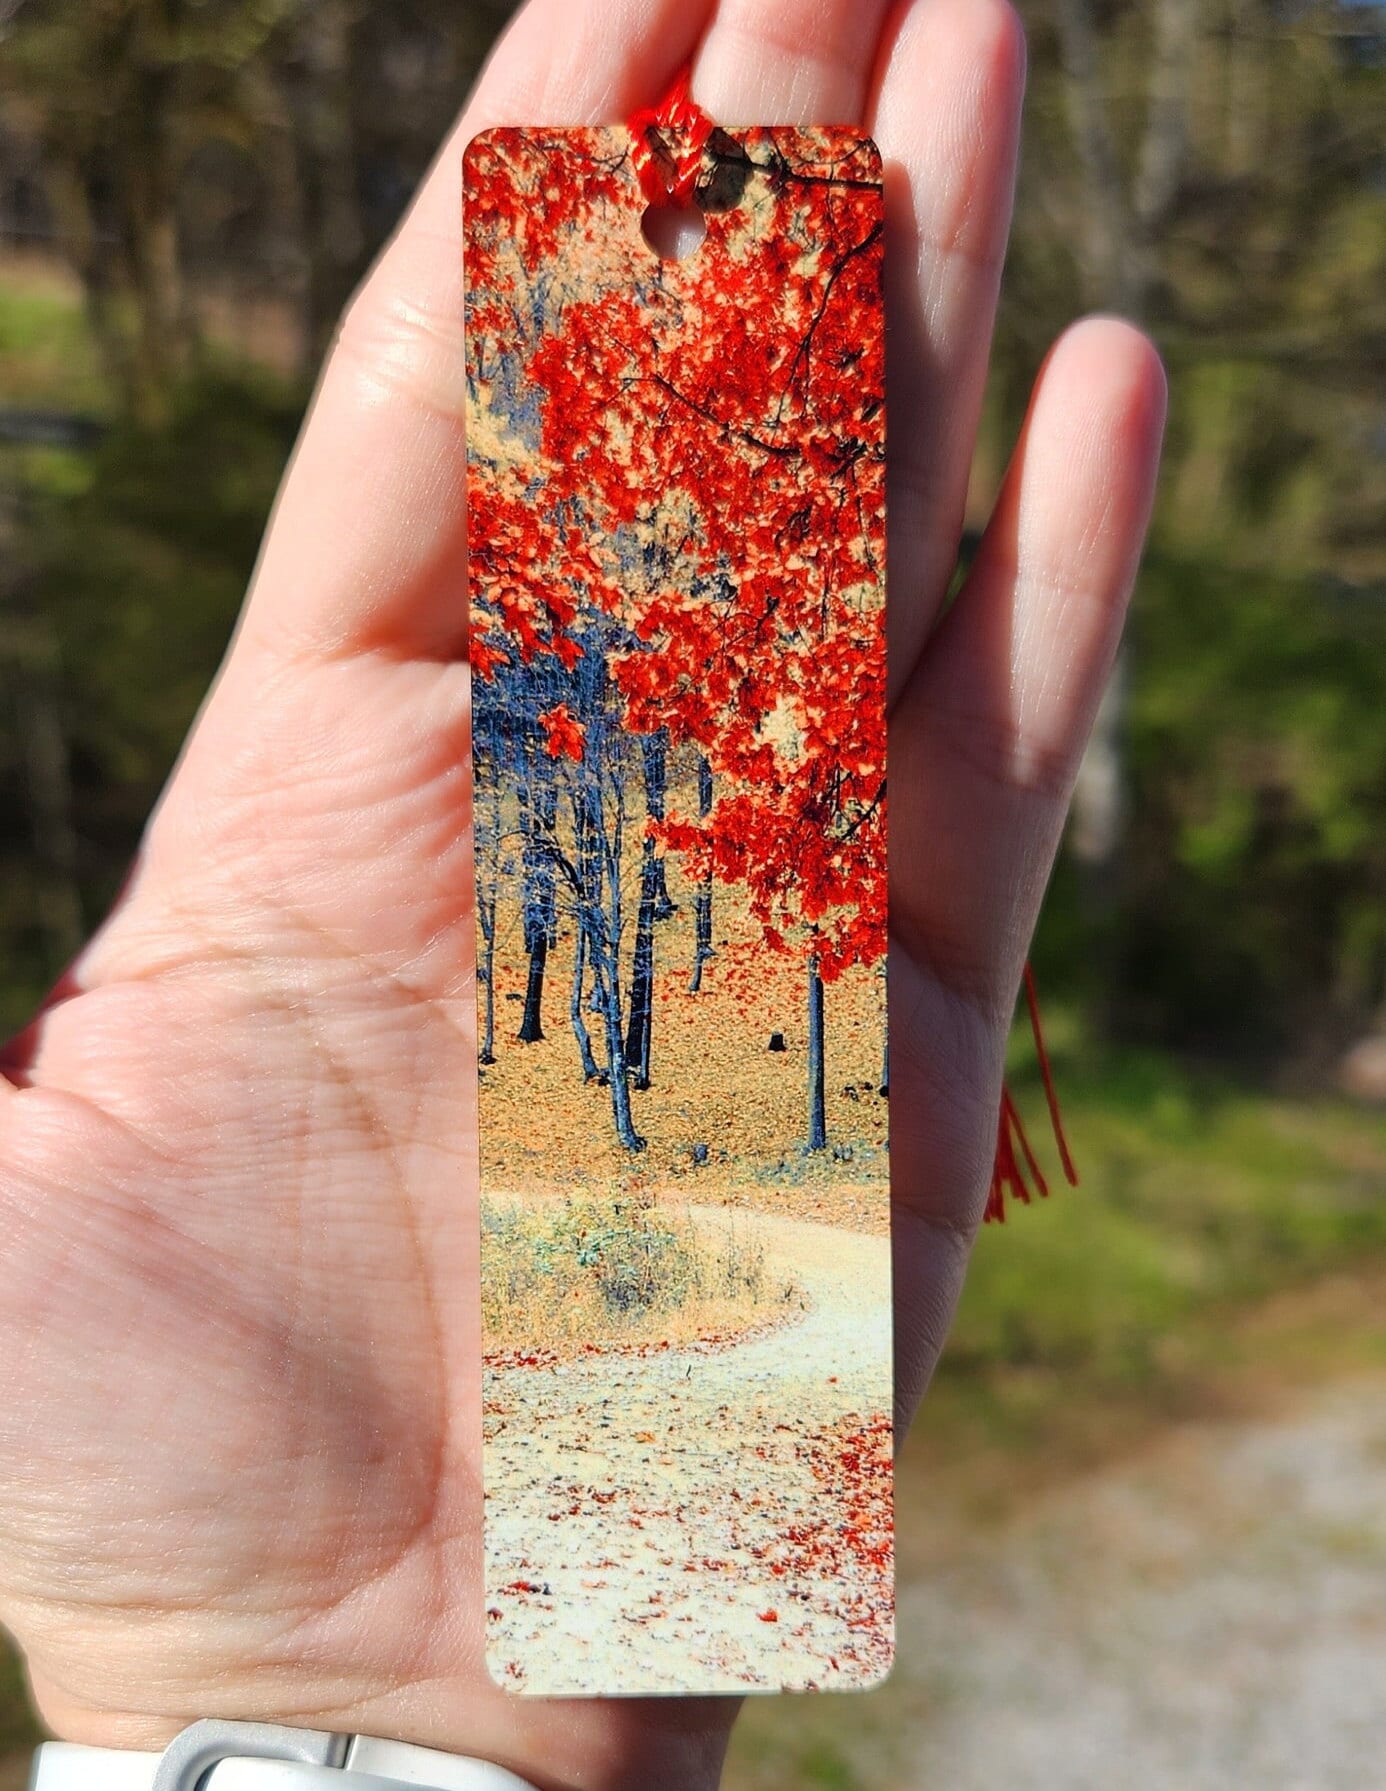 Small Single Sided Aluminum Metal Bookmark with Tassel - 4.7 in x 1.25 in - Red|Orange|Yellow Fall Trees - Book Lover/Reader's Gift